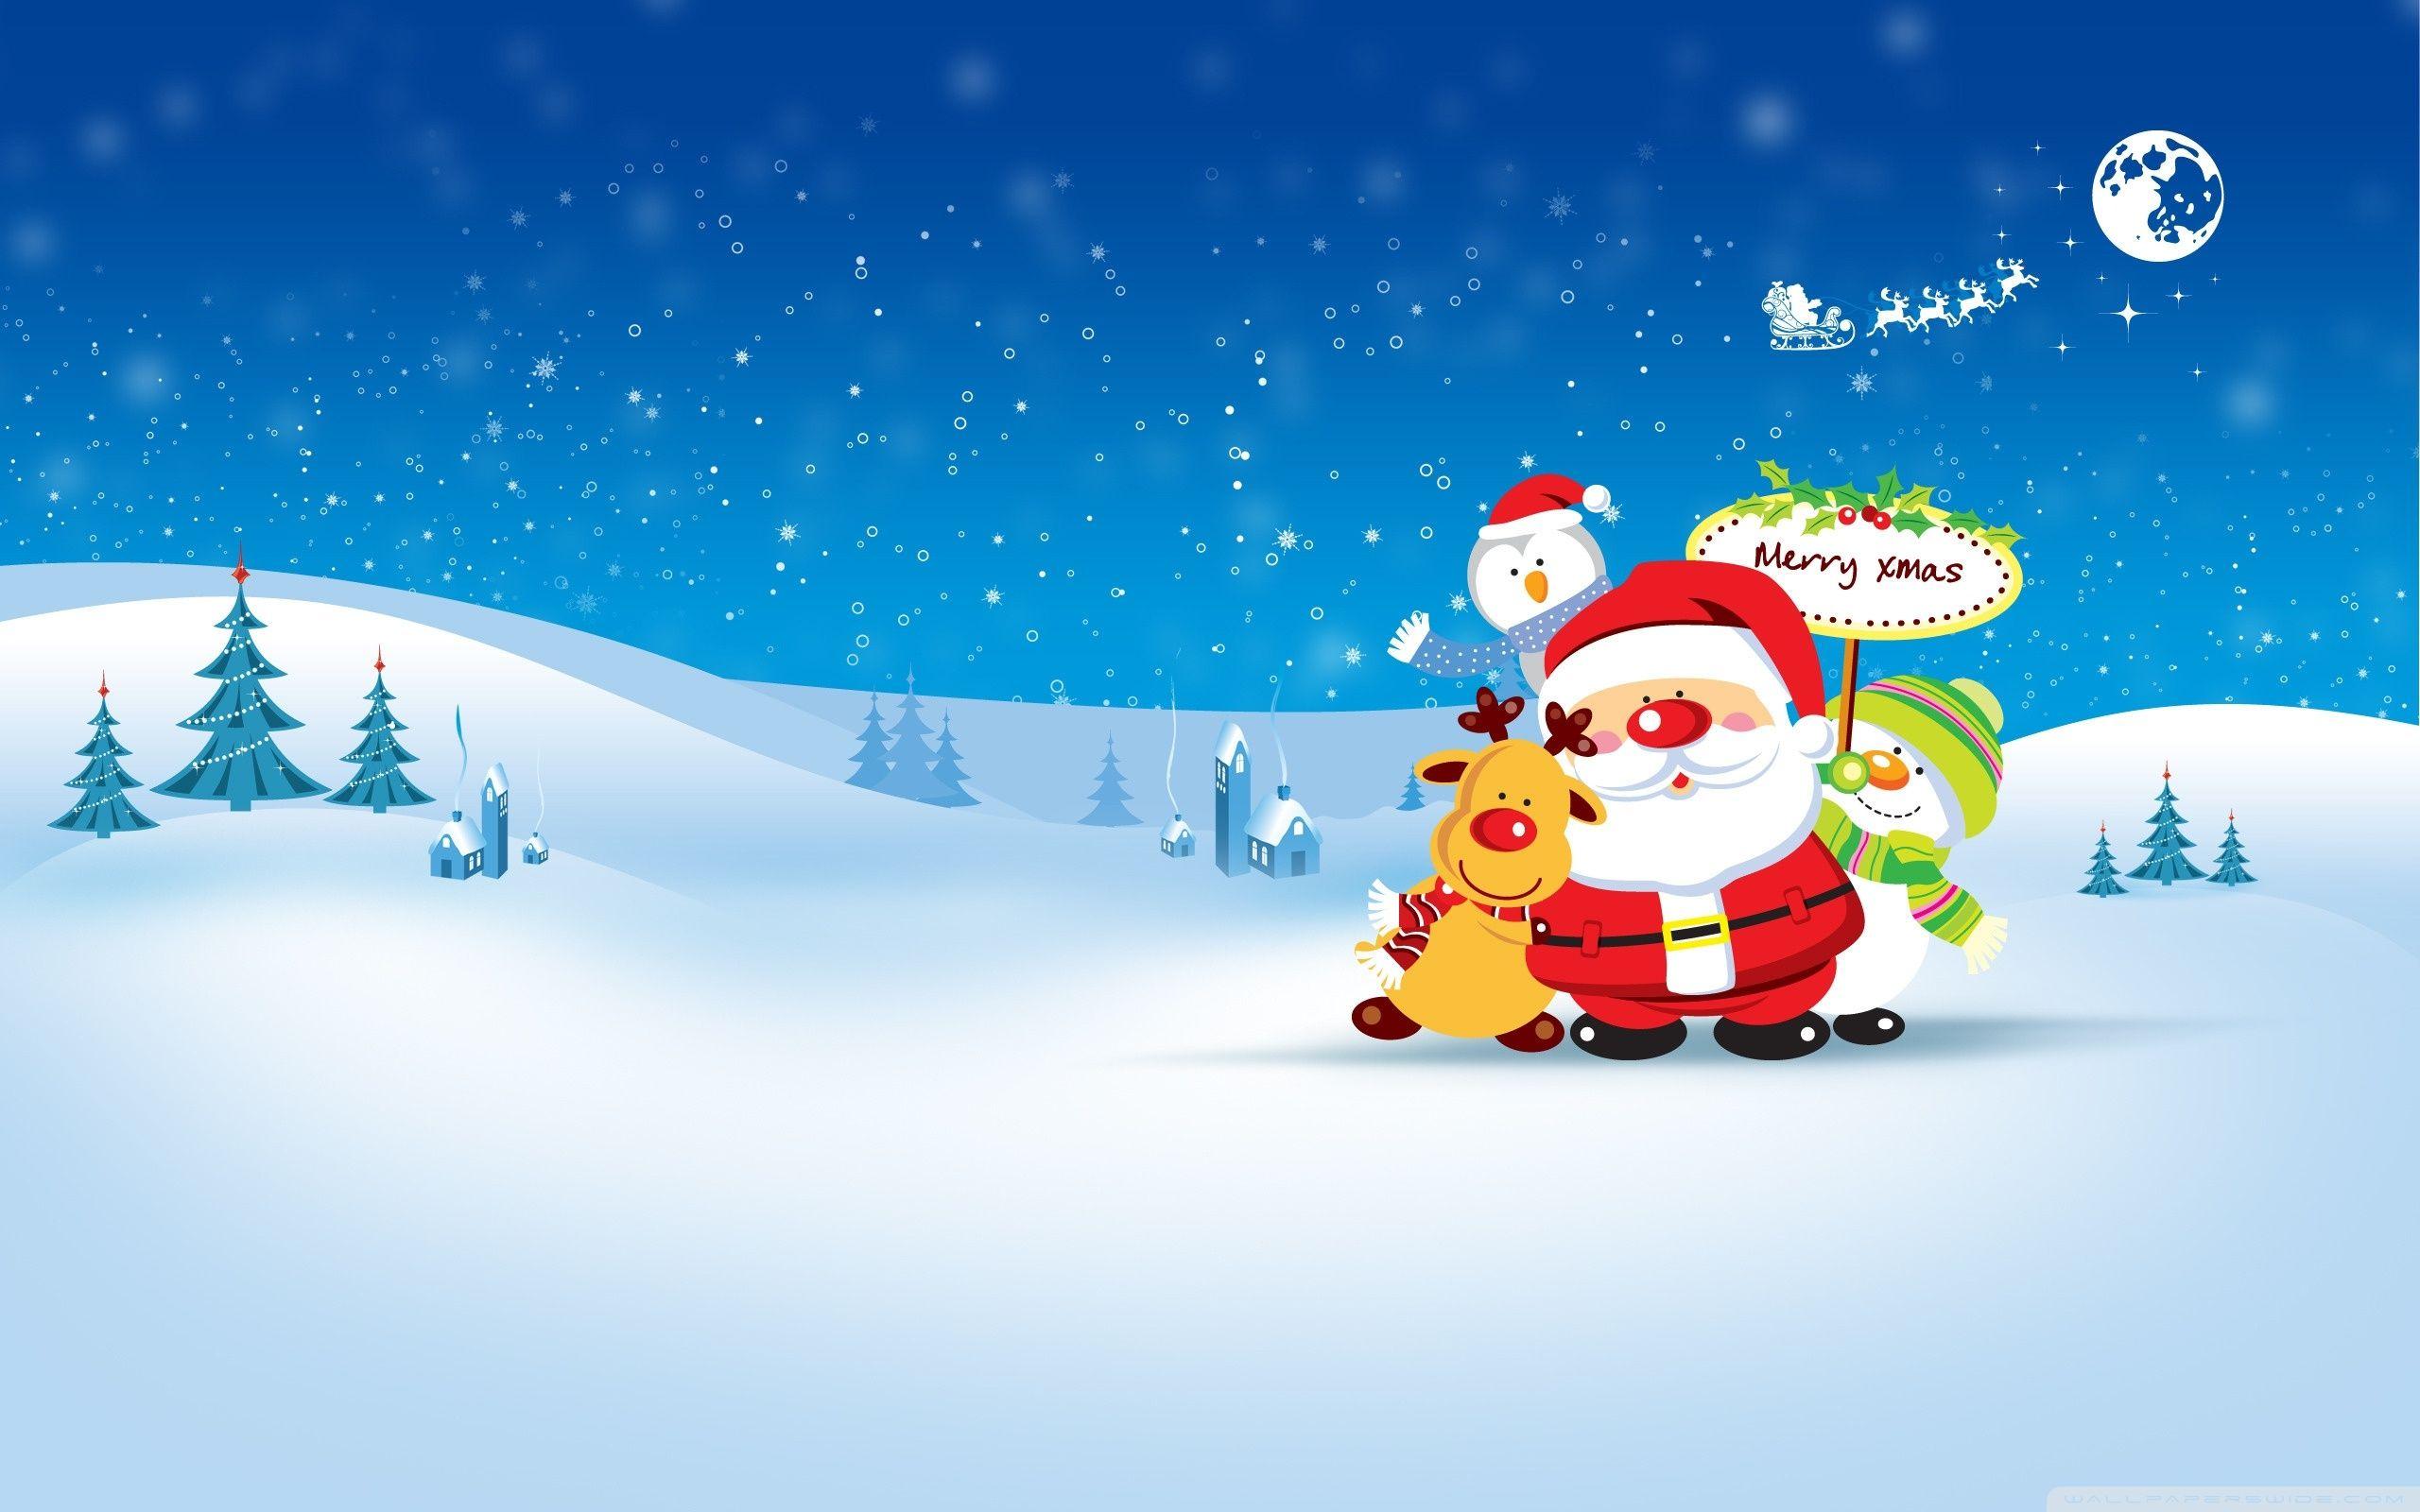 Merry Christmas wallpaper and image free download New